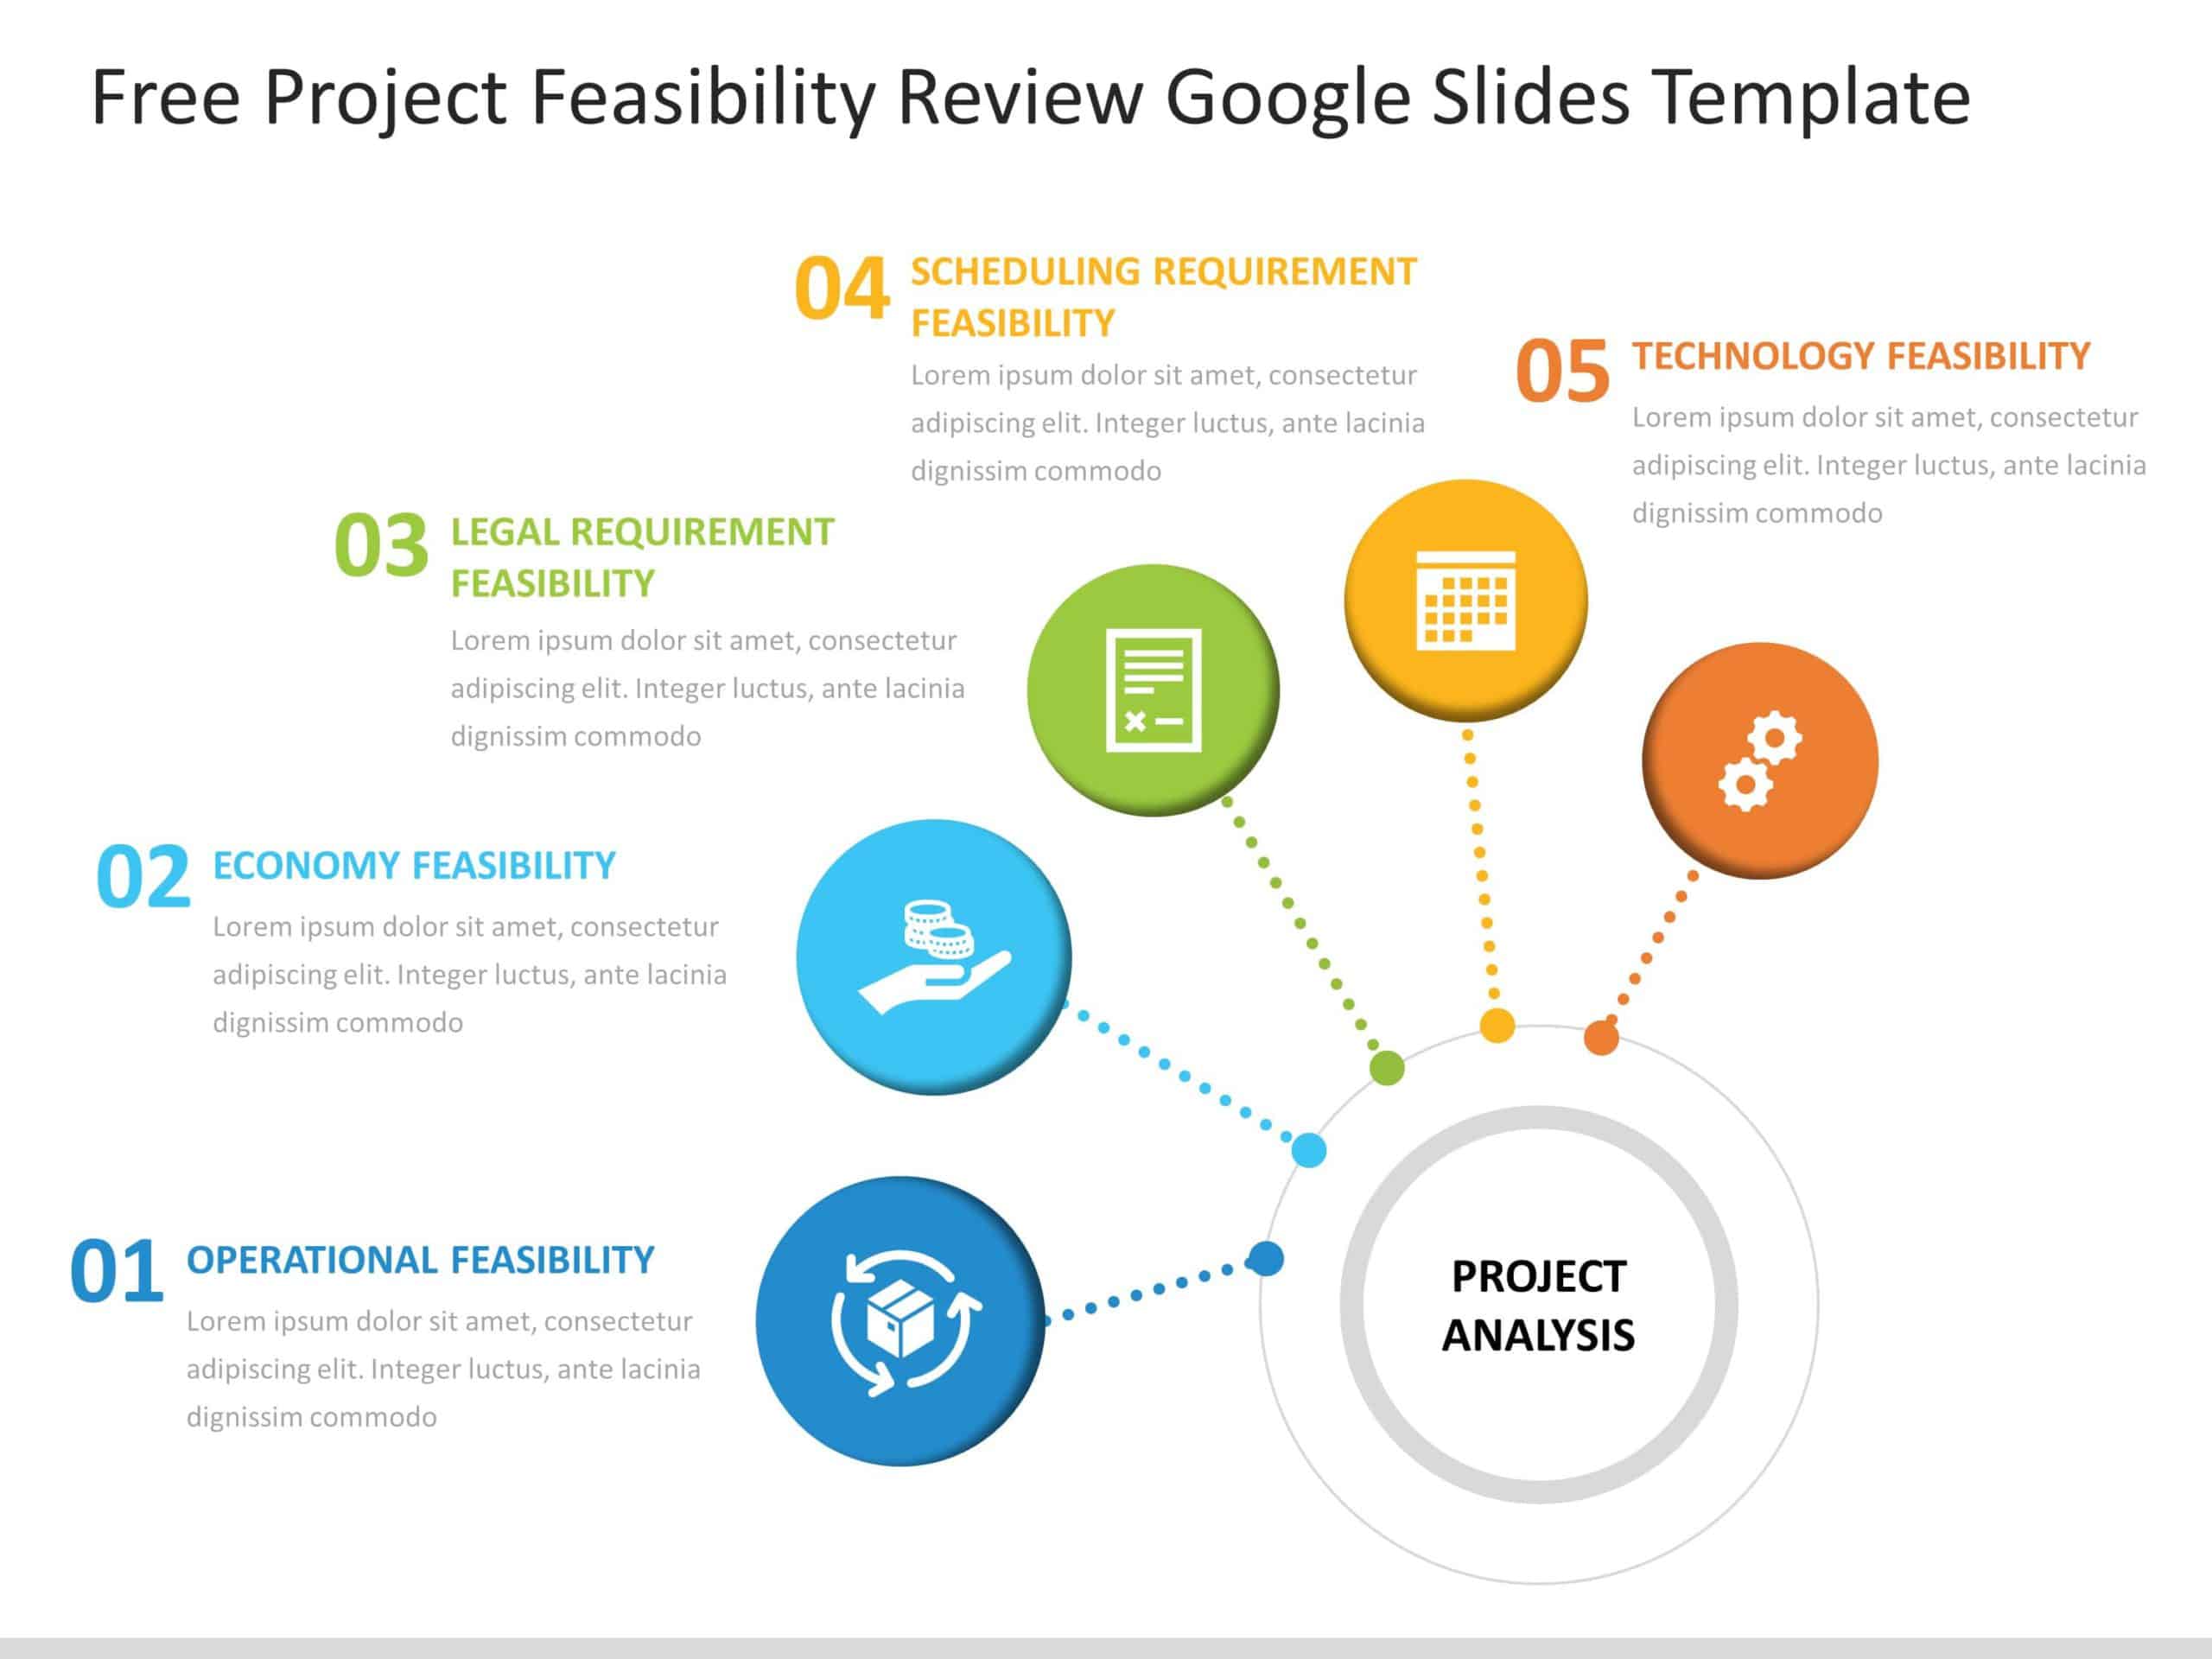 Free Project Feasibility Review Google Slides Template 